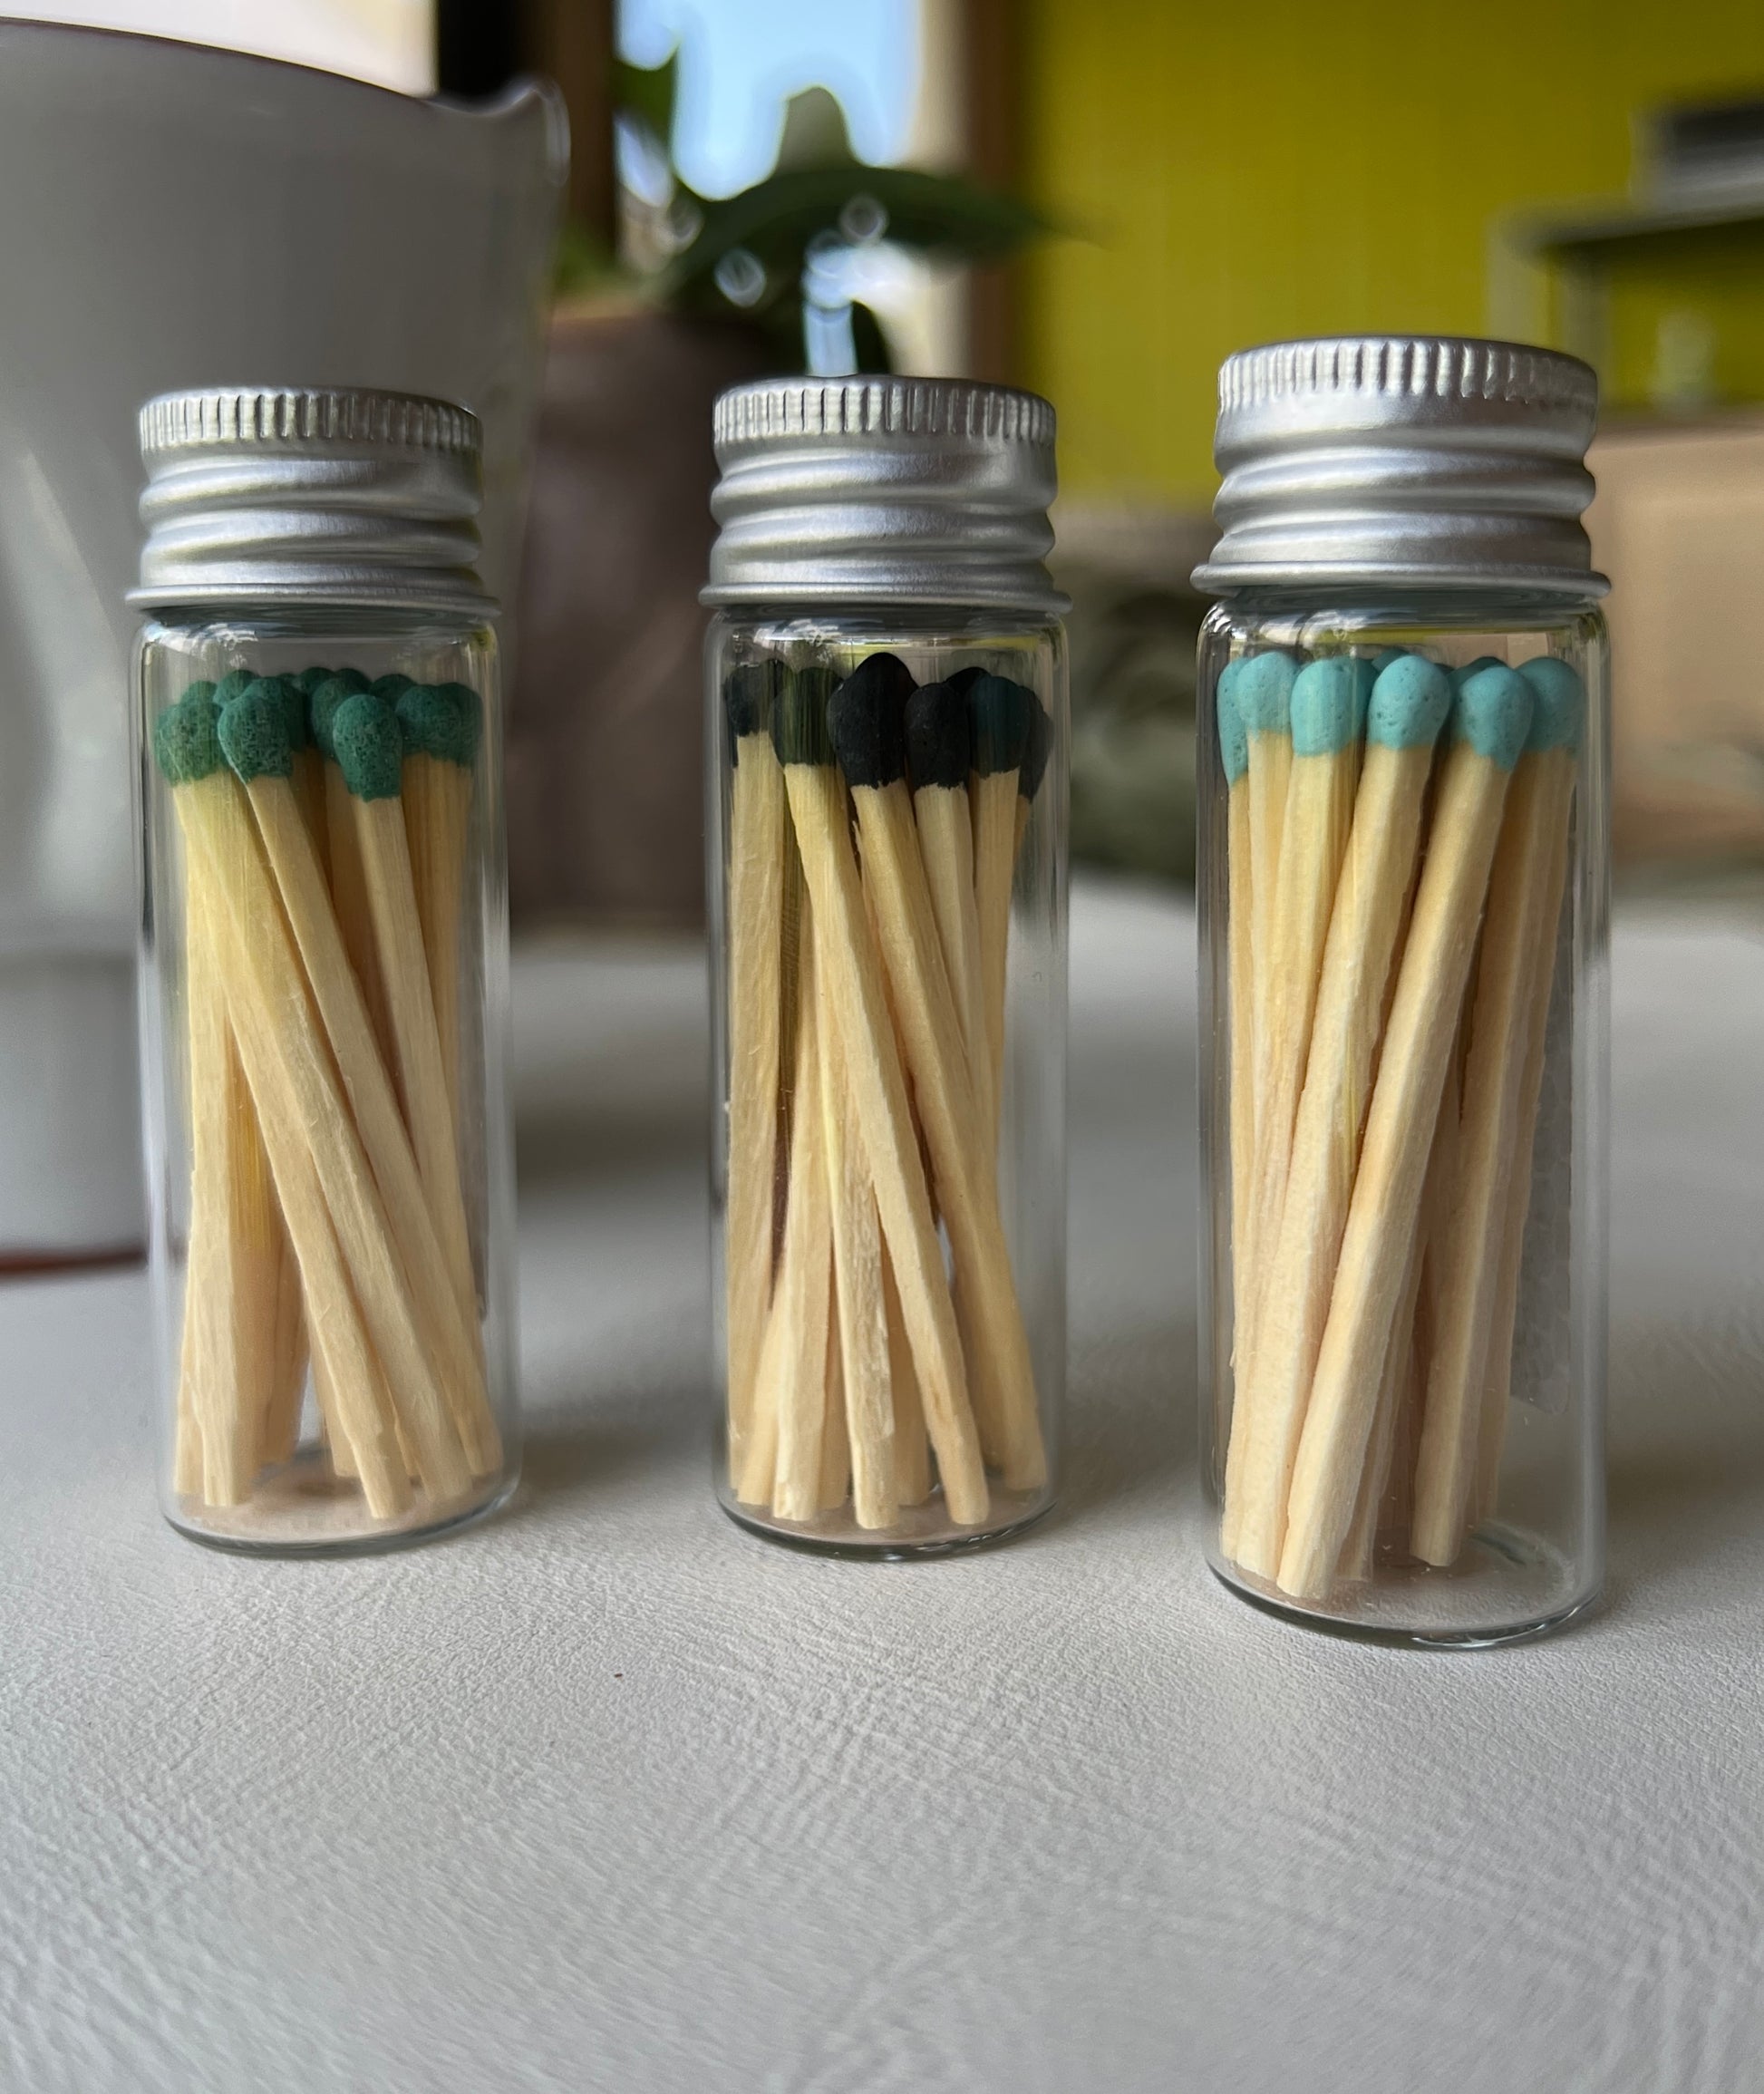 Colorful matches displayed in glass jars.